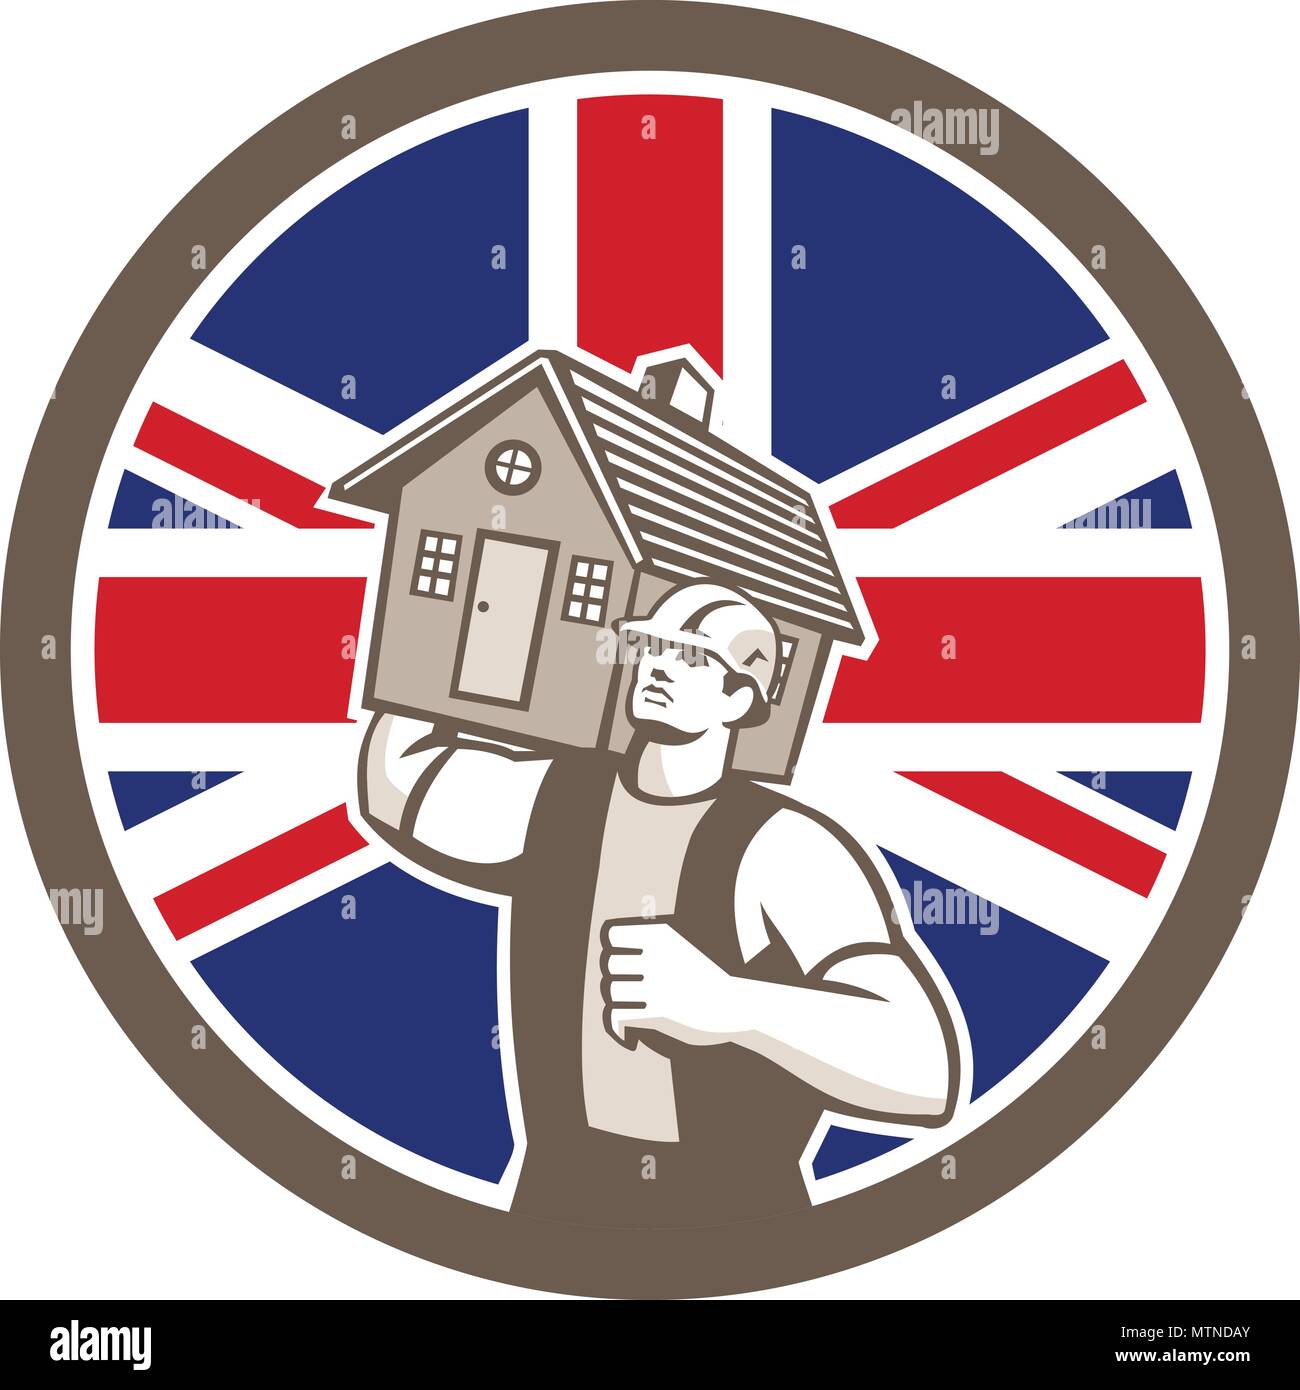 Icon retro style illustration of a British house removal or mover carrying a house with United Kingdom UK, Great Britain Union Jack flag set inside ci Stock Vector